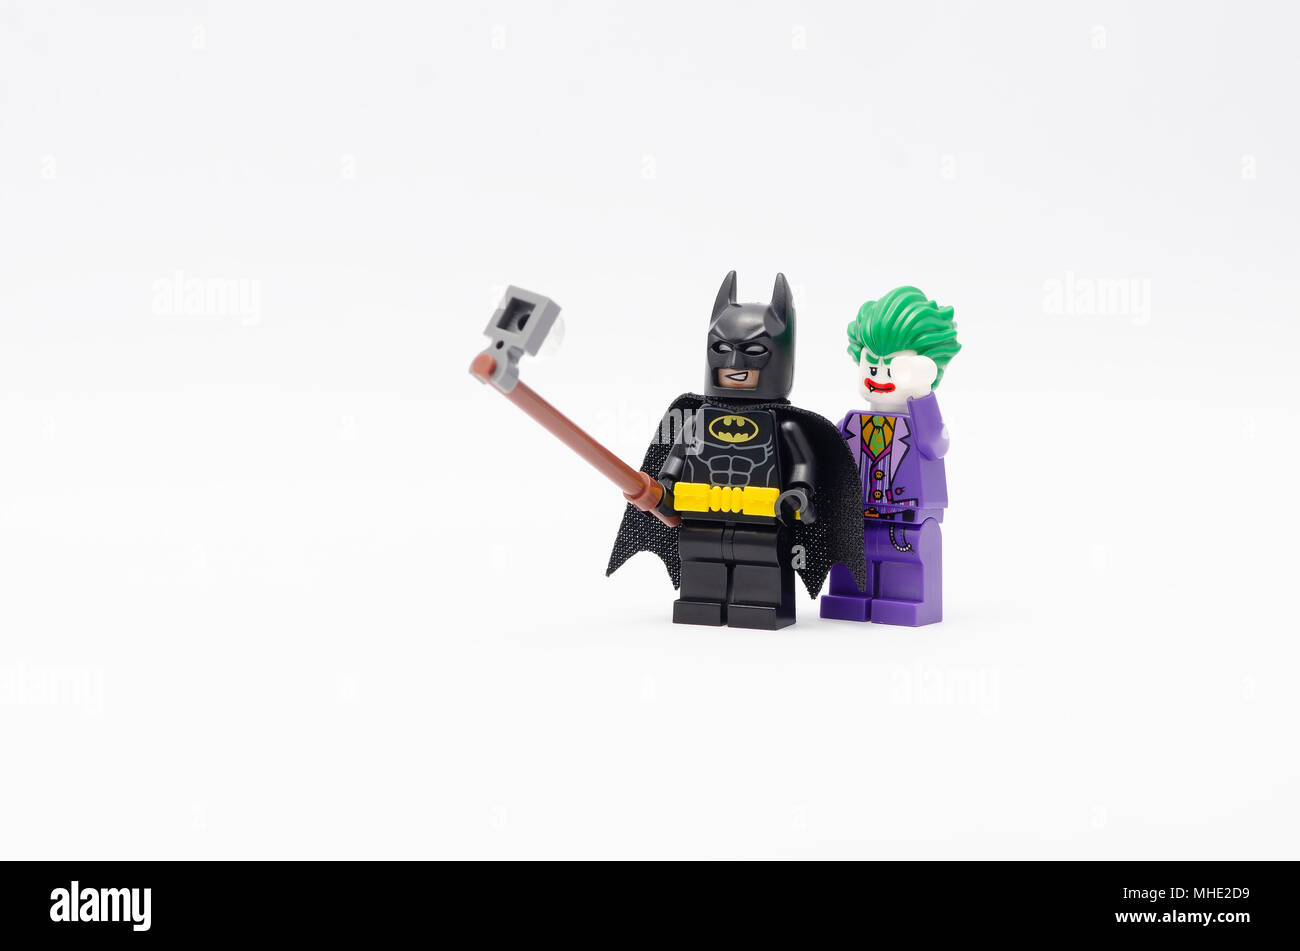 mini figure of batman and joker taking picture together. Lego minifigures are manufactured by The Lego Group. Stock Photo